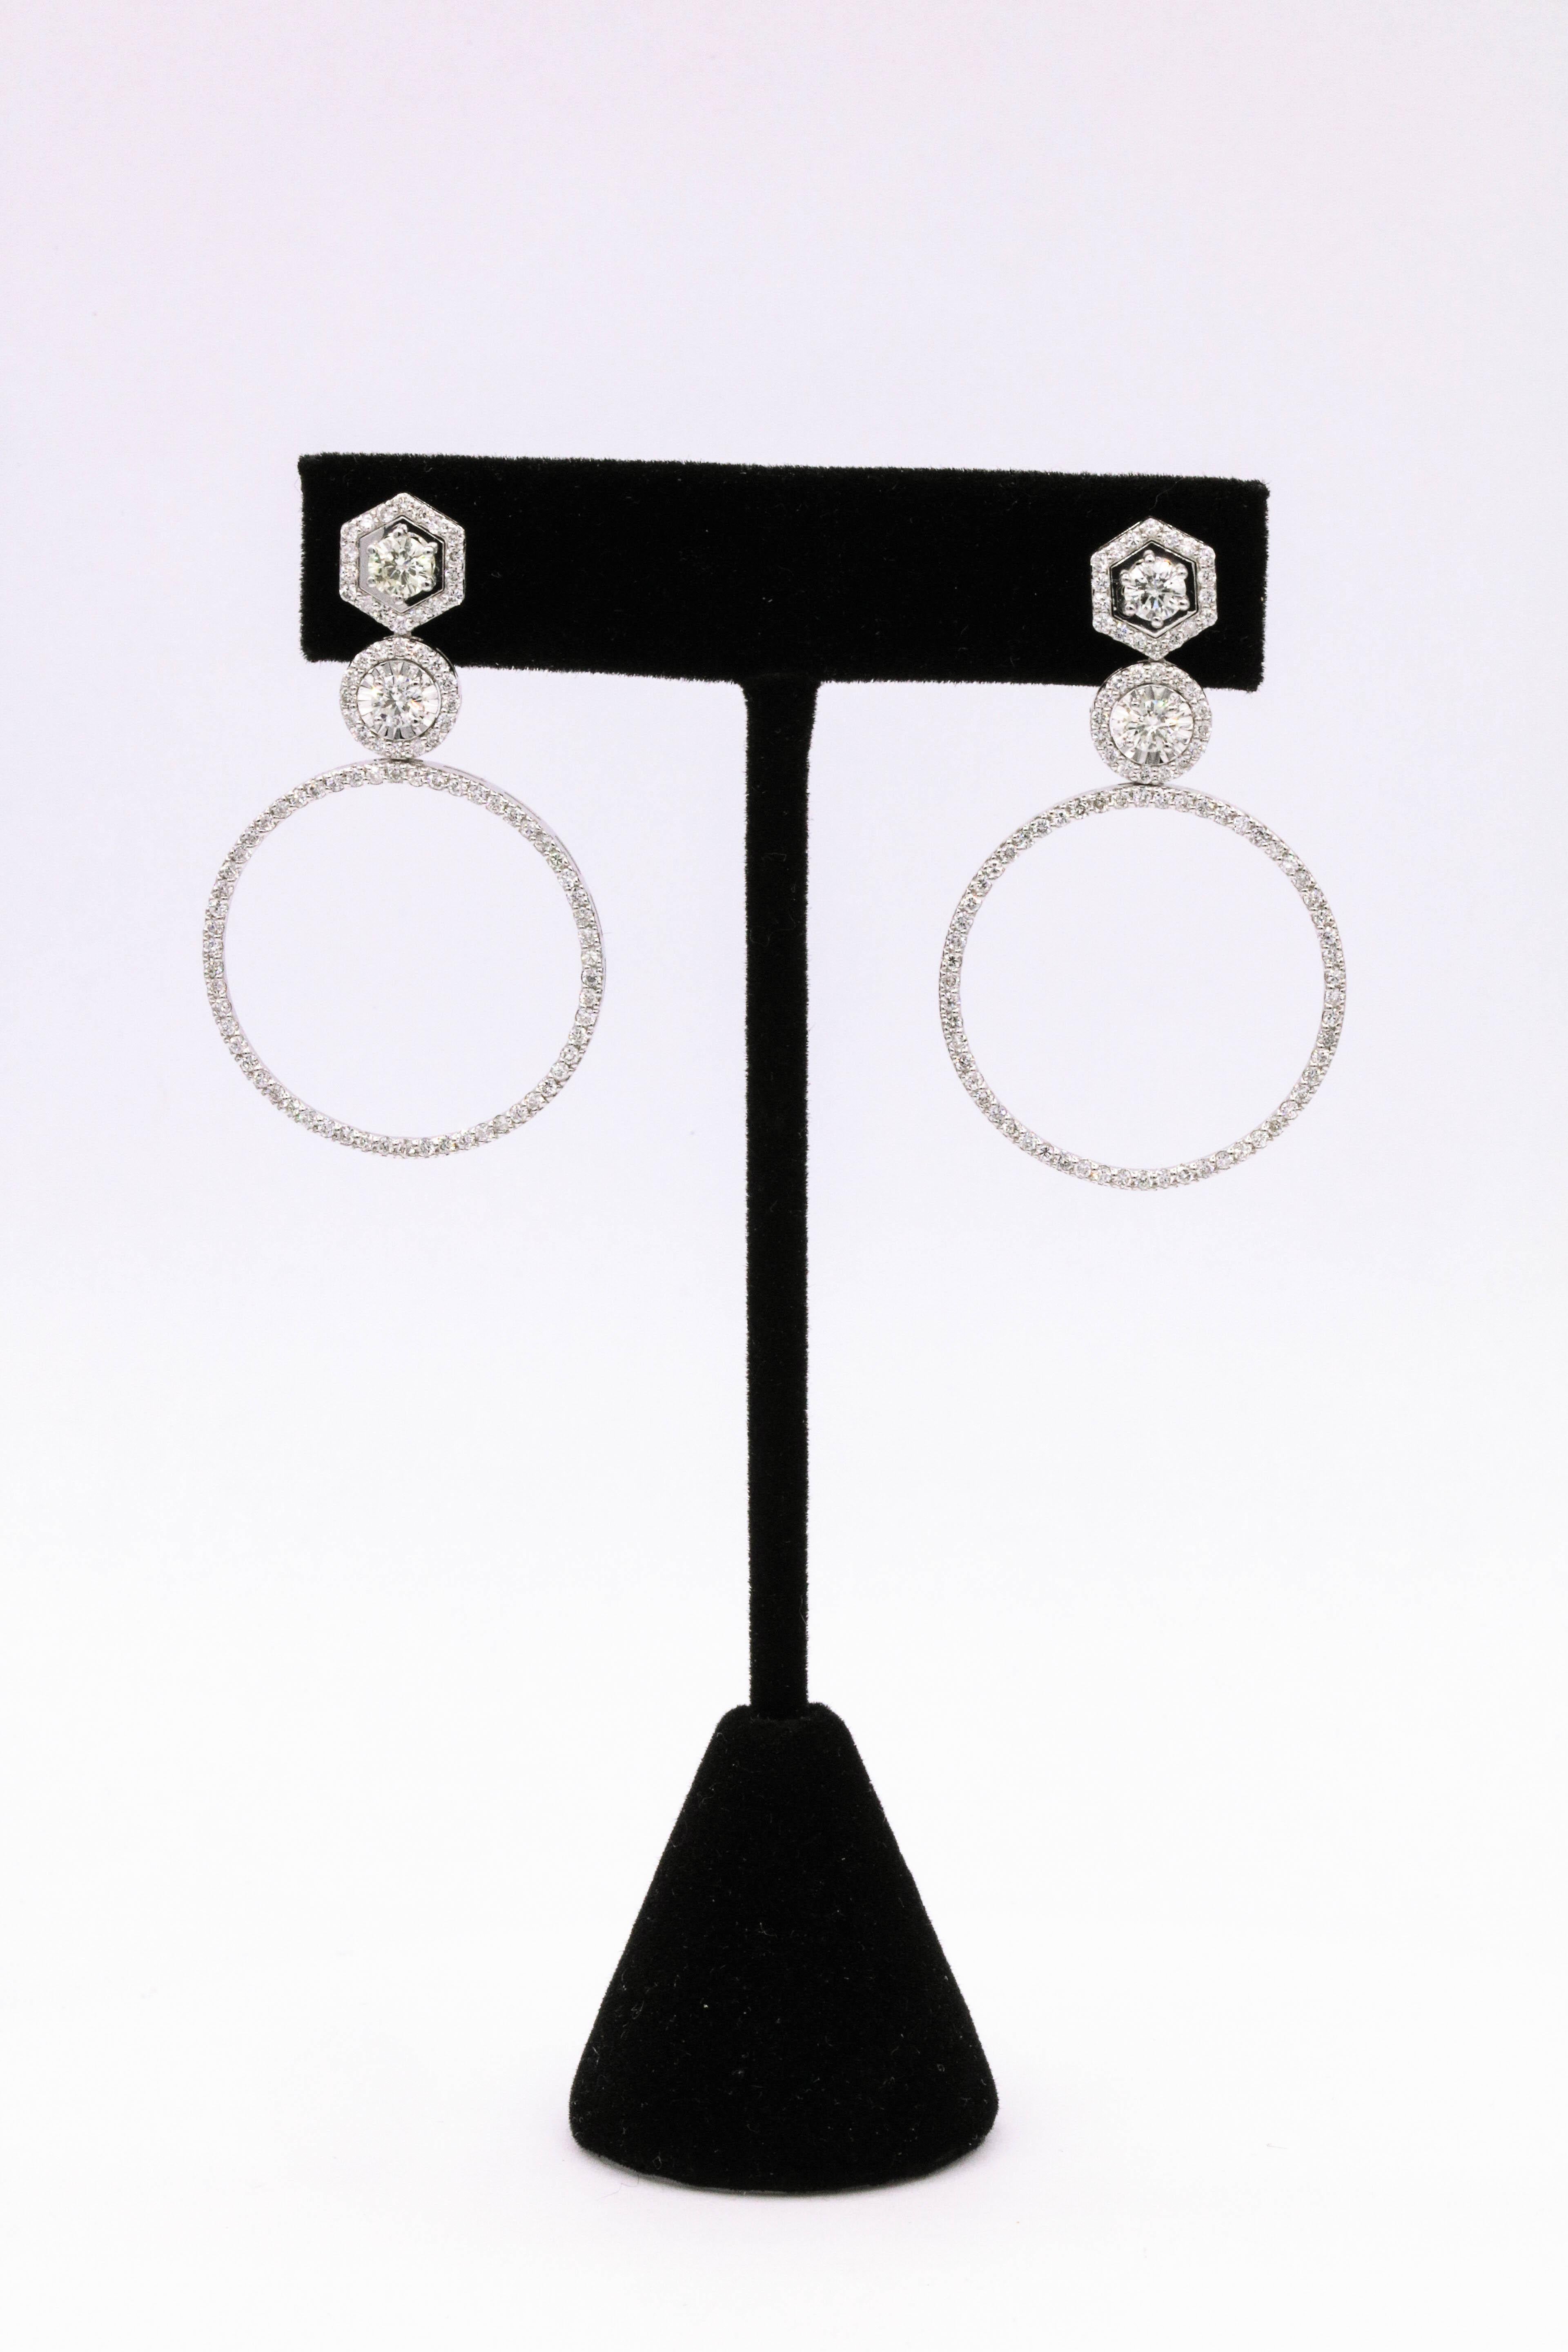 14K White gold drop earrings featuring 188 round brilliants weighing 2.52 carats.
Color G-H
Clarity SI